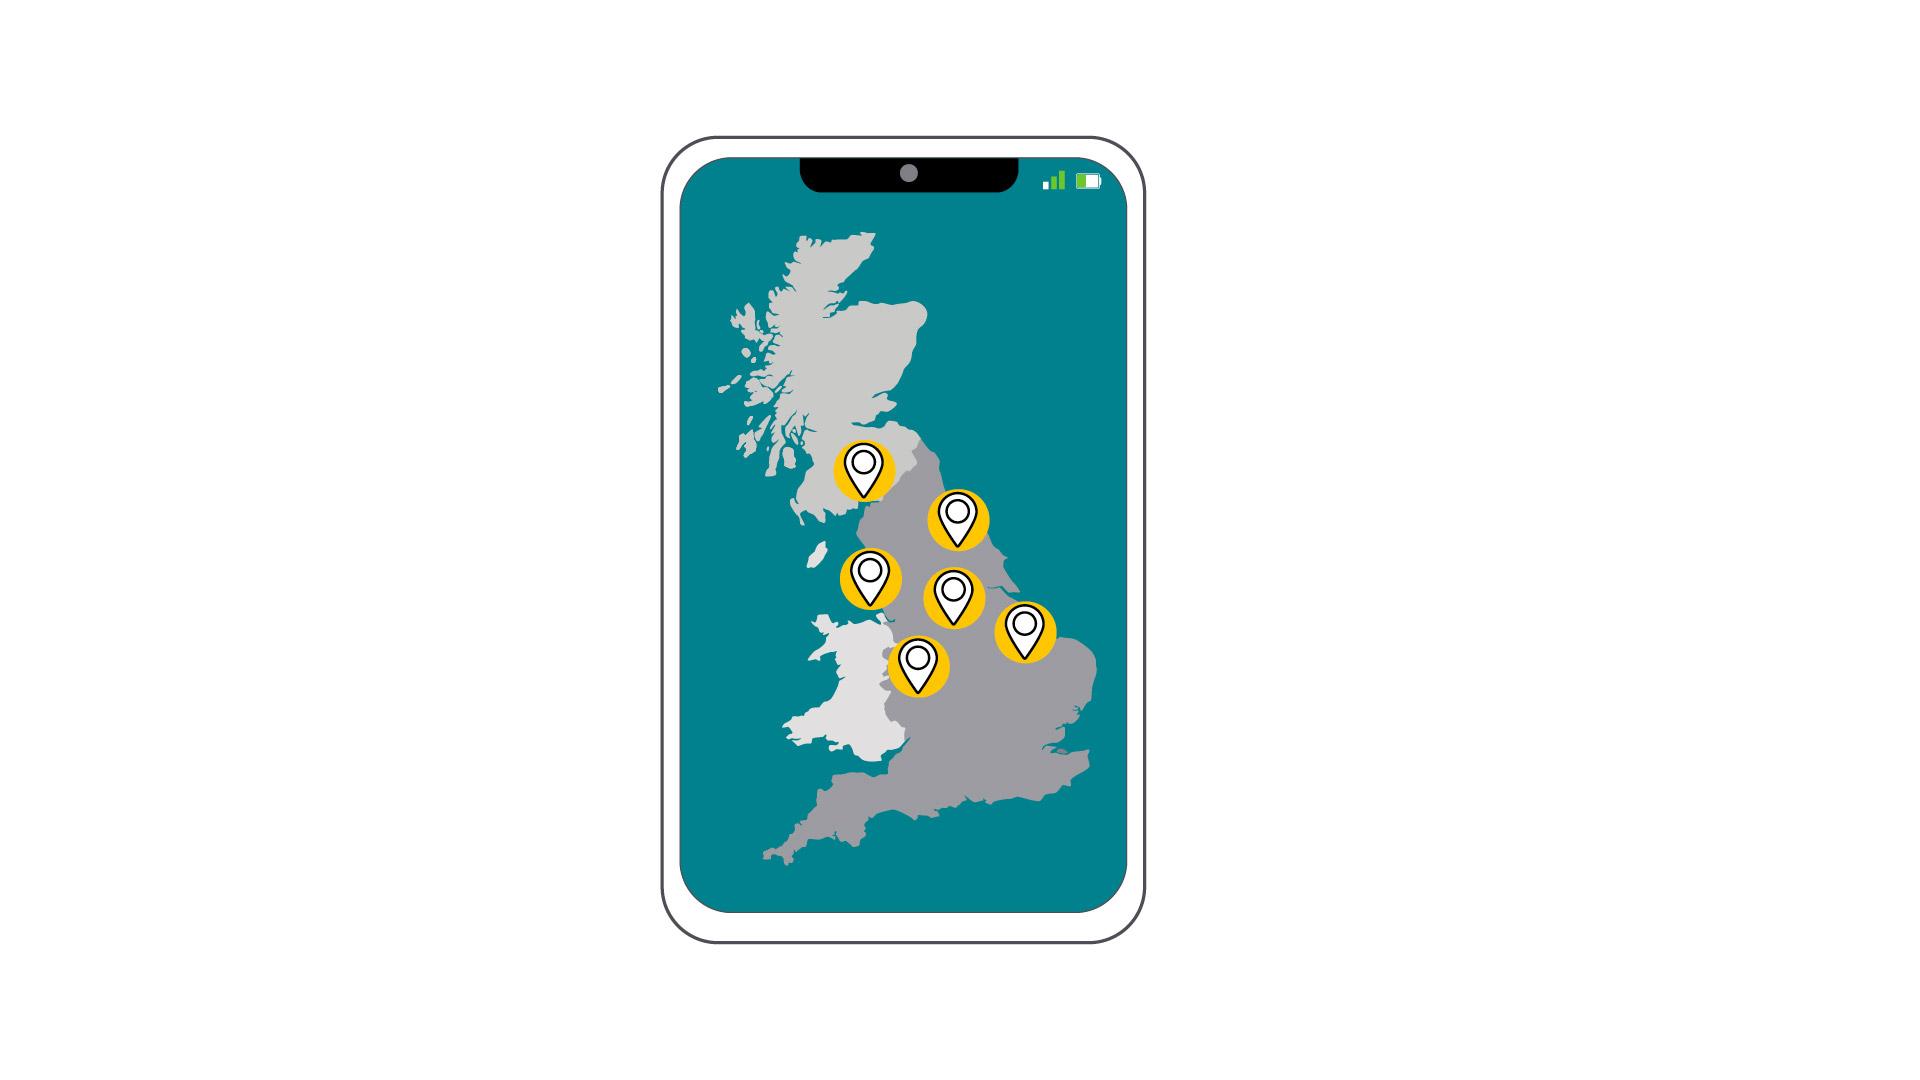 Phone screen with map of UK and pins at locations